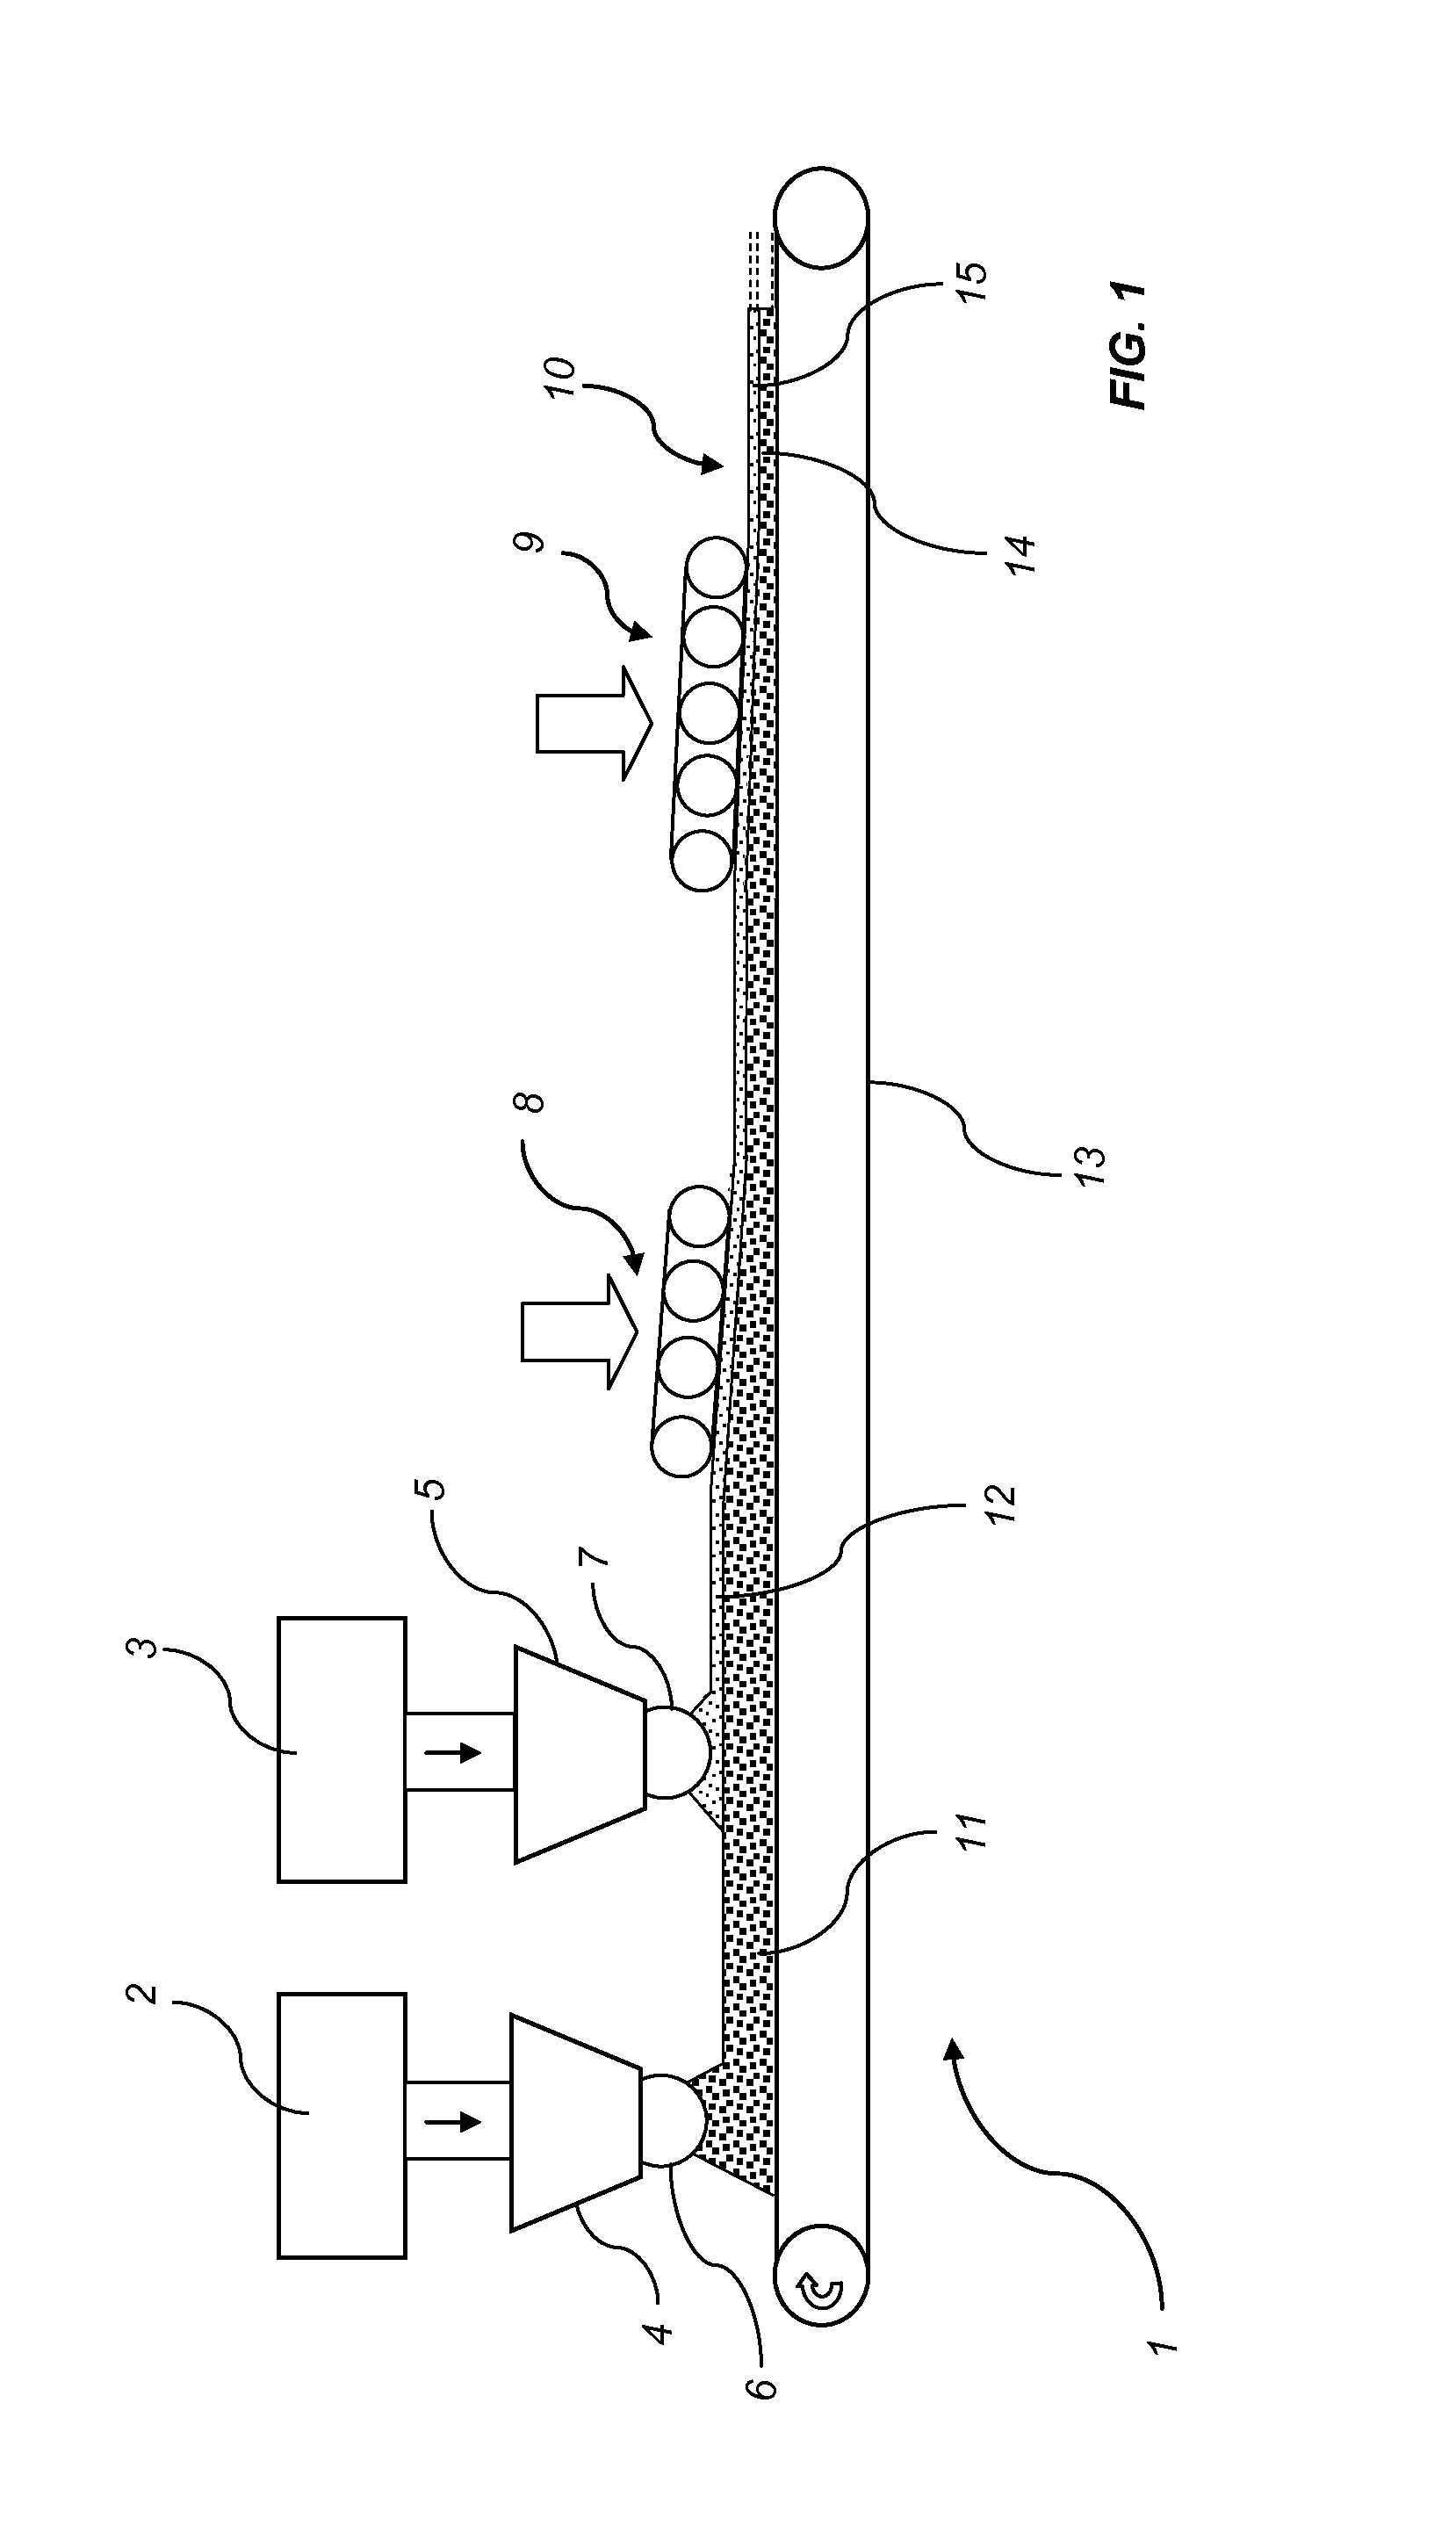 Method of manufacturing a wood-based board and such a wood-based board